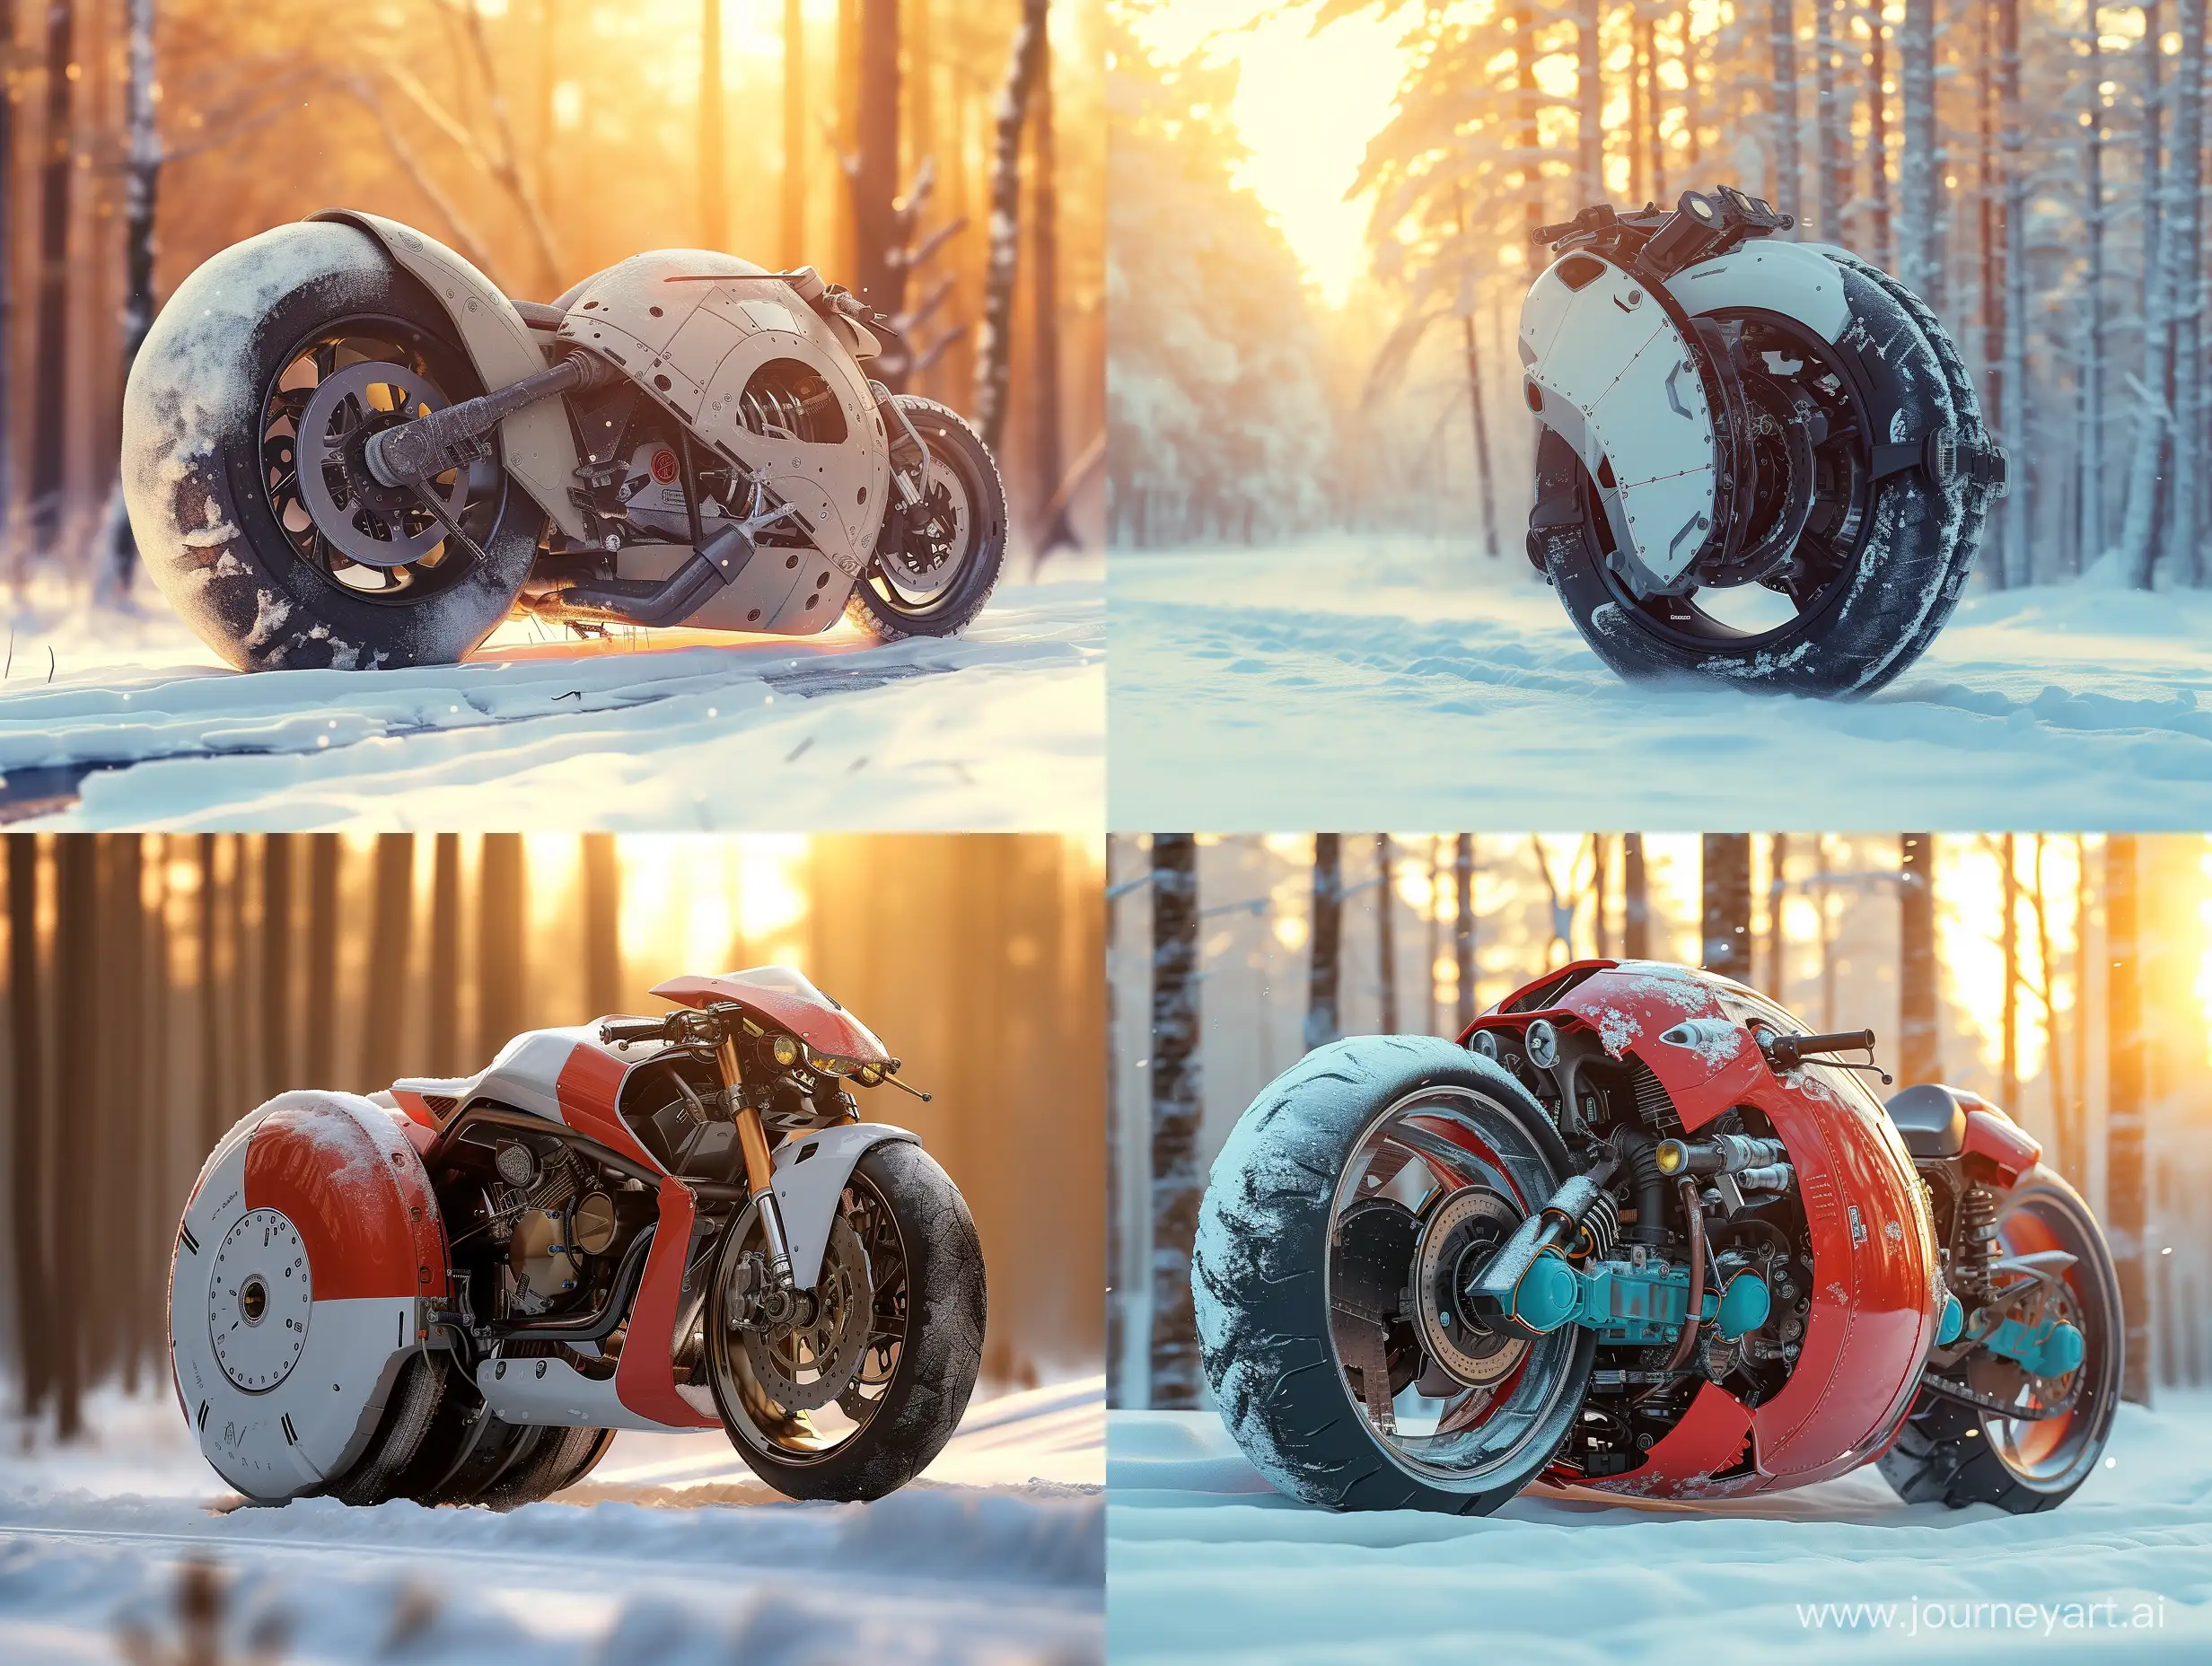 An offroad monowheel motorcycle,with big jet engin,in snow,incredible detail,warm light.